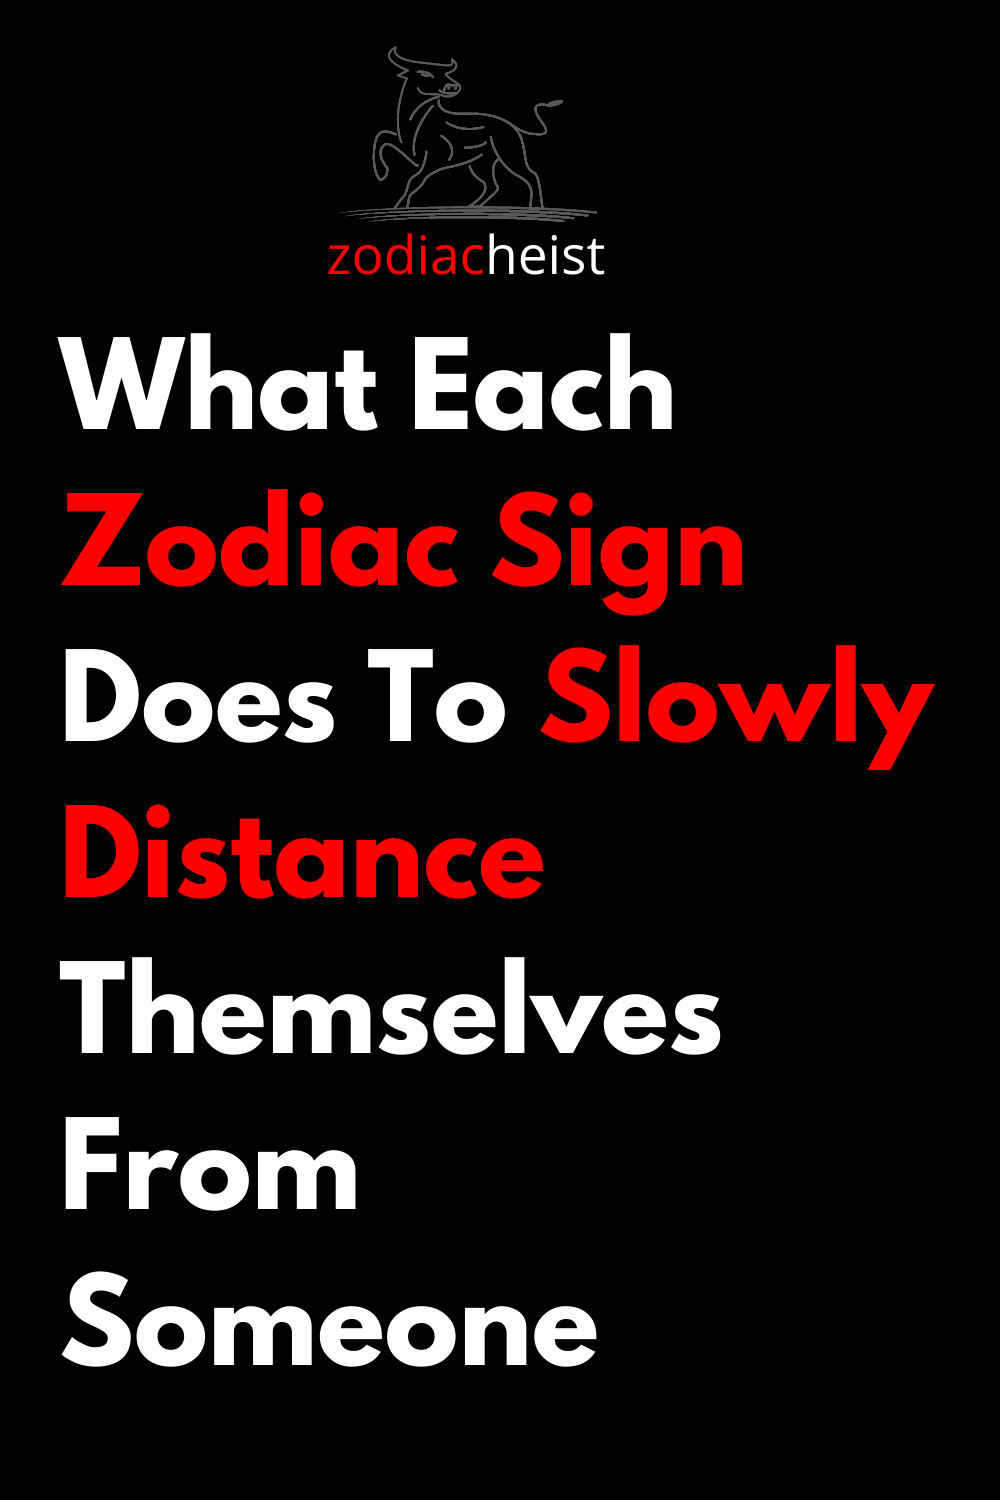 What Each Zodiac Sign Does To Slowly Distance Themselves From Someone